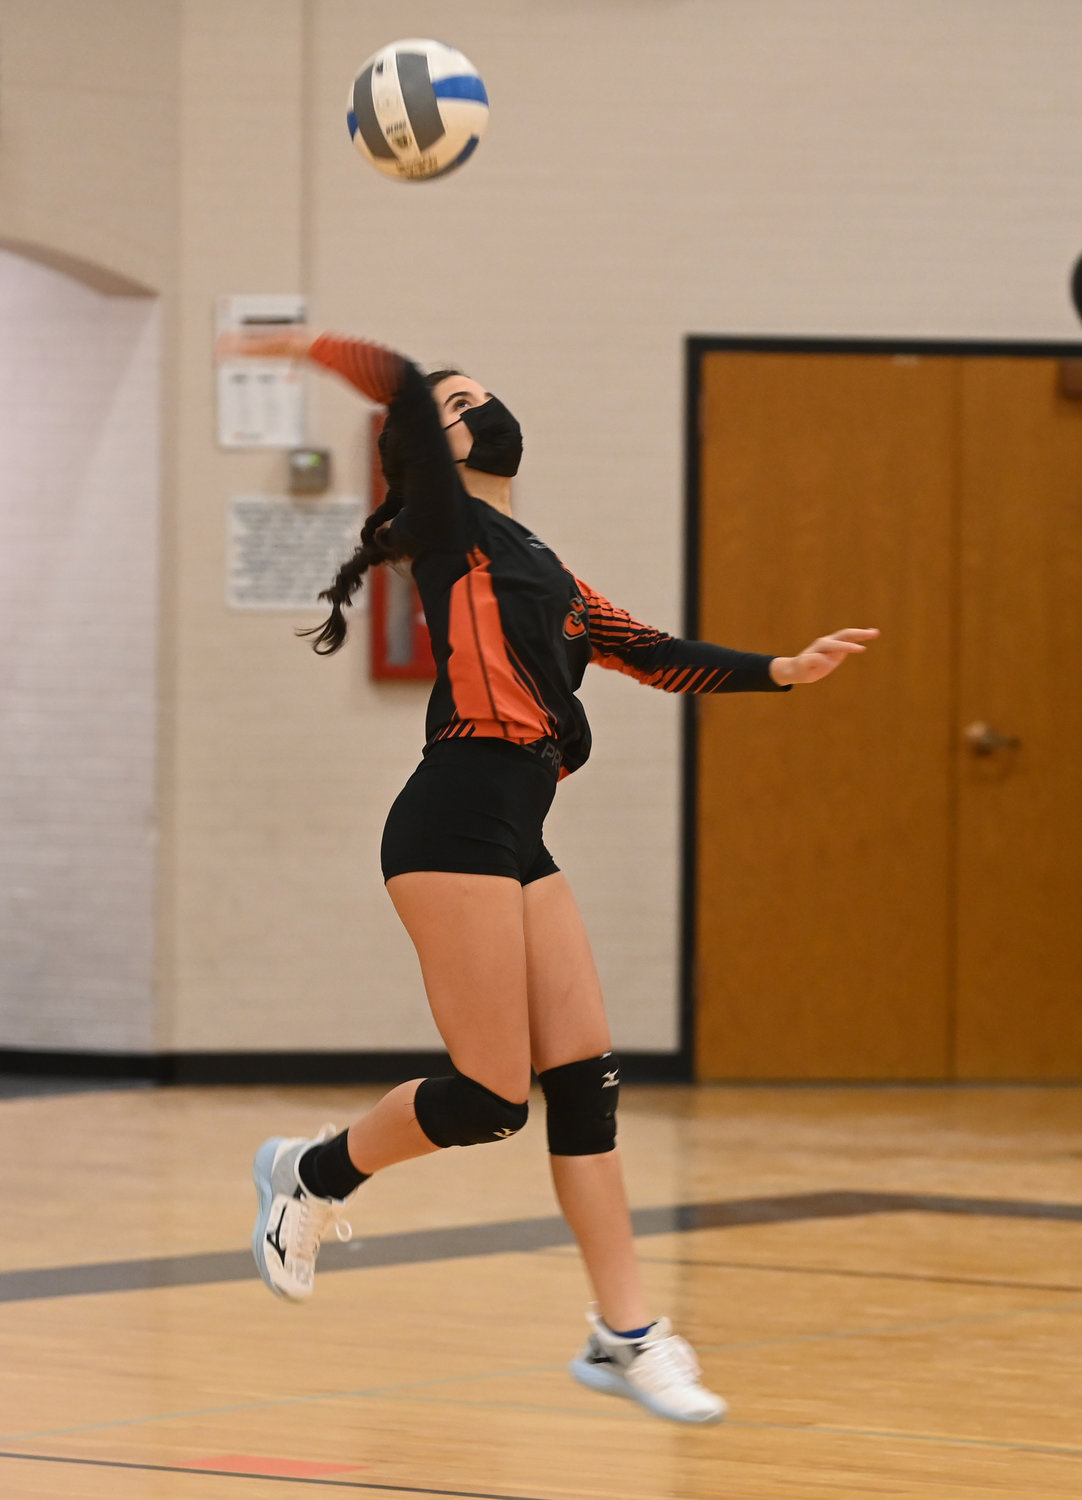 LOOKING FOR AN ACE — Jenavieve Cianfrocco of Rome Free Academy winds up for a serve against Oneida Monday night at home in the Tri-Valley League. match The Black Knights won 3-0.